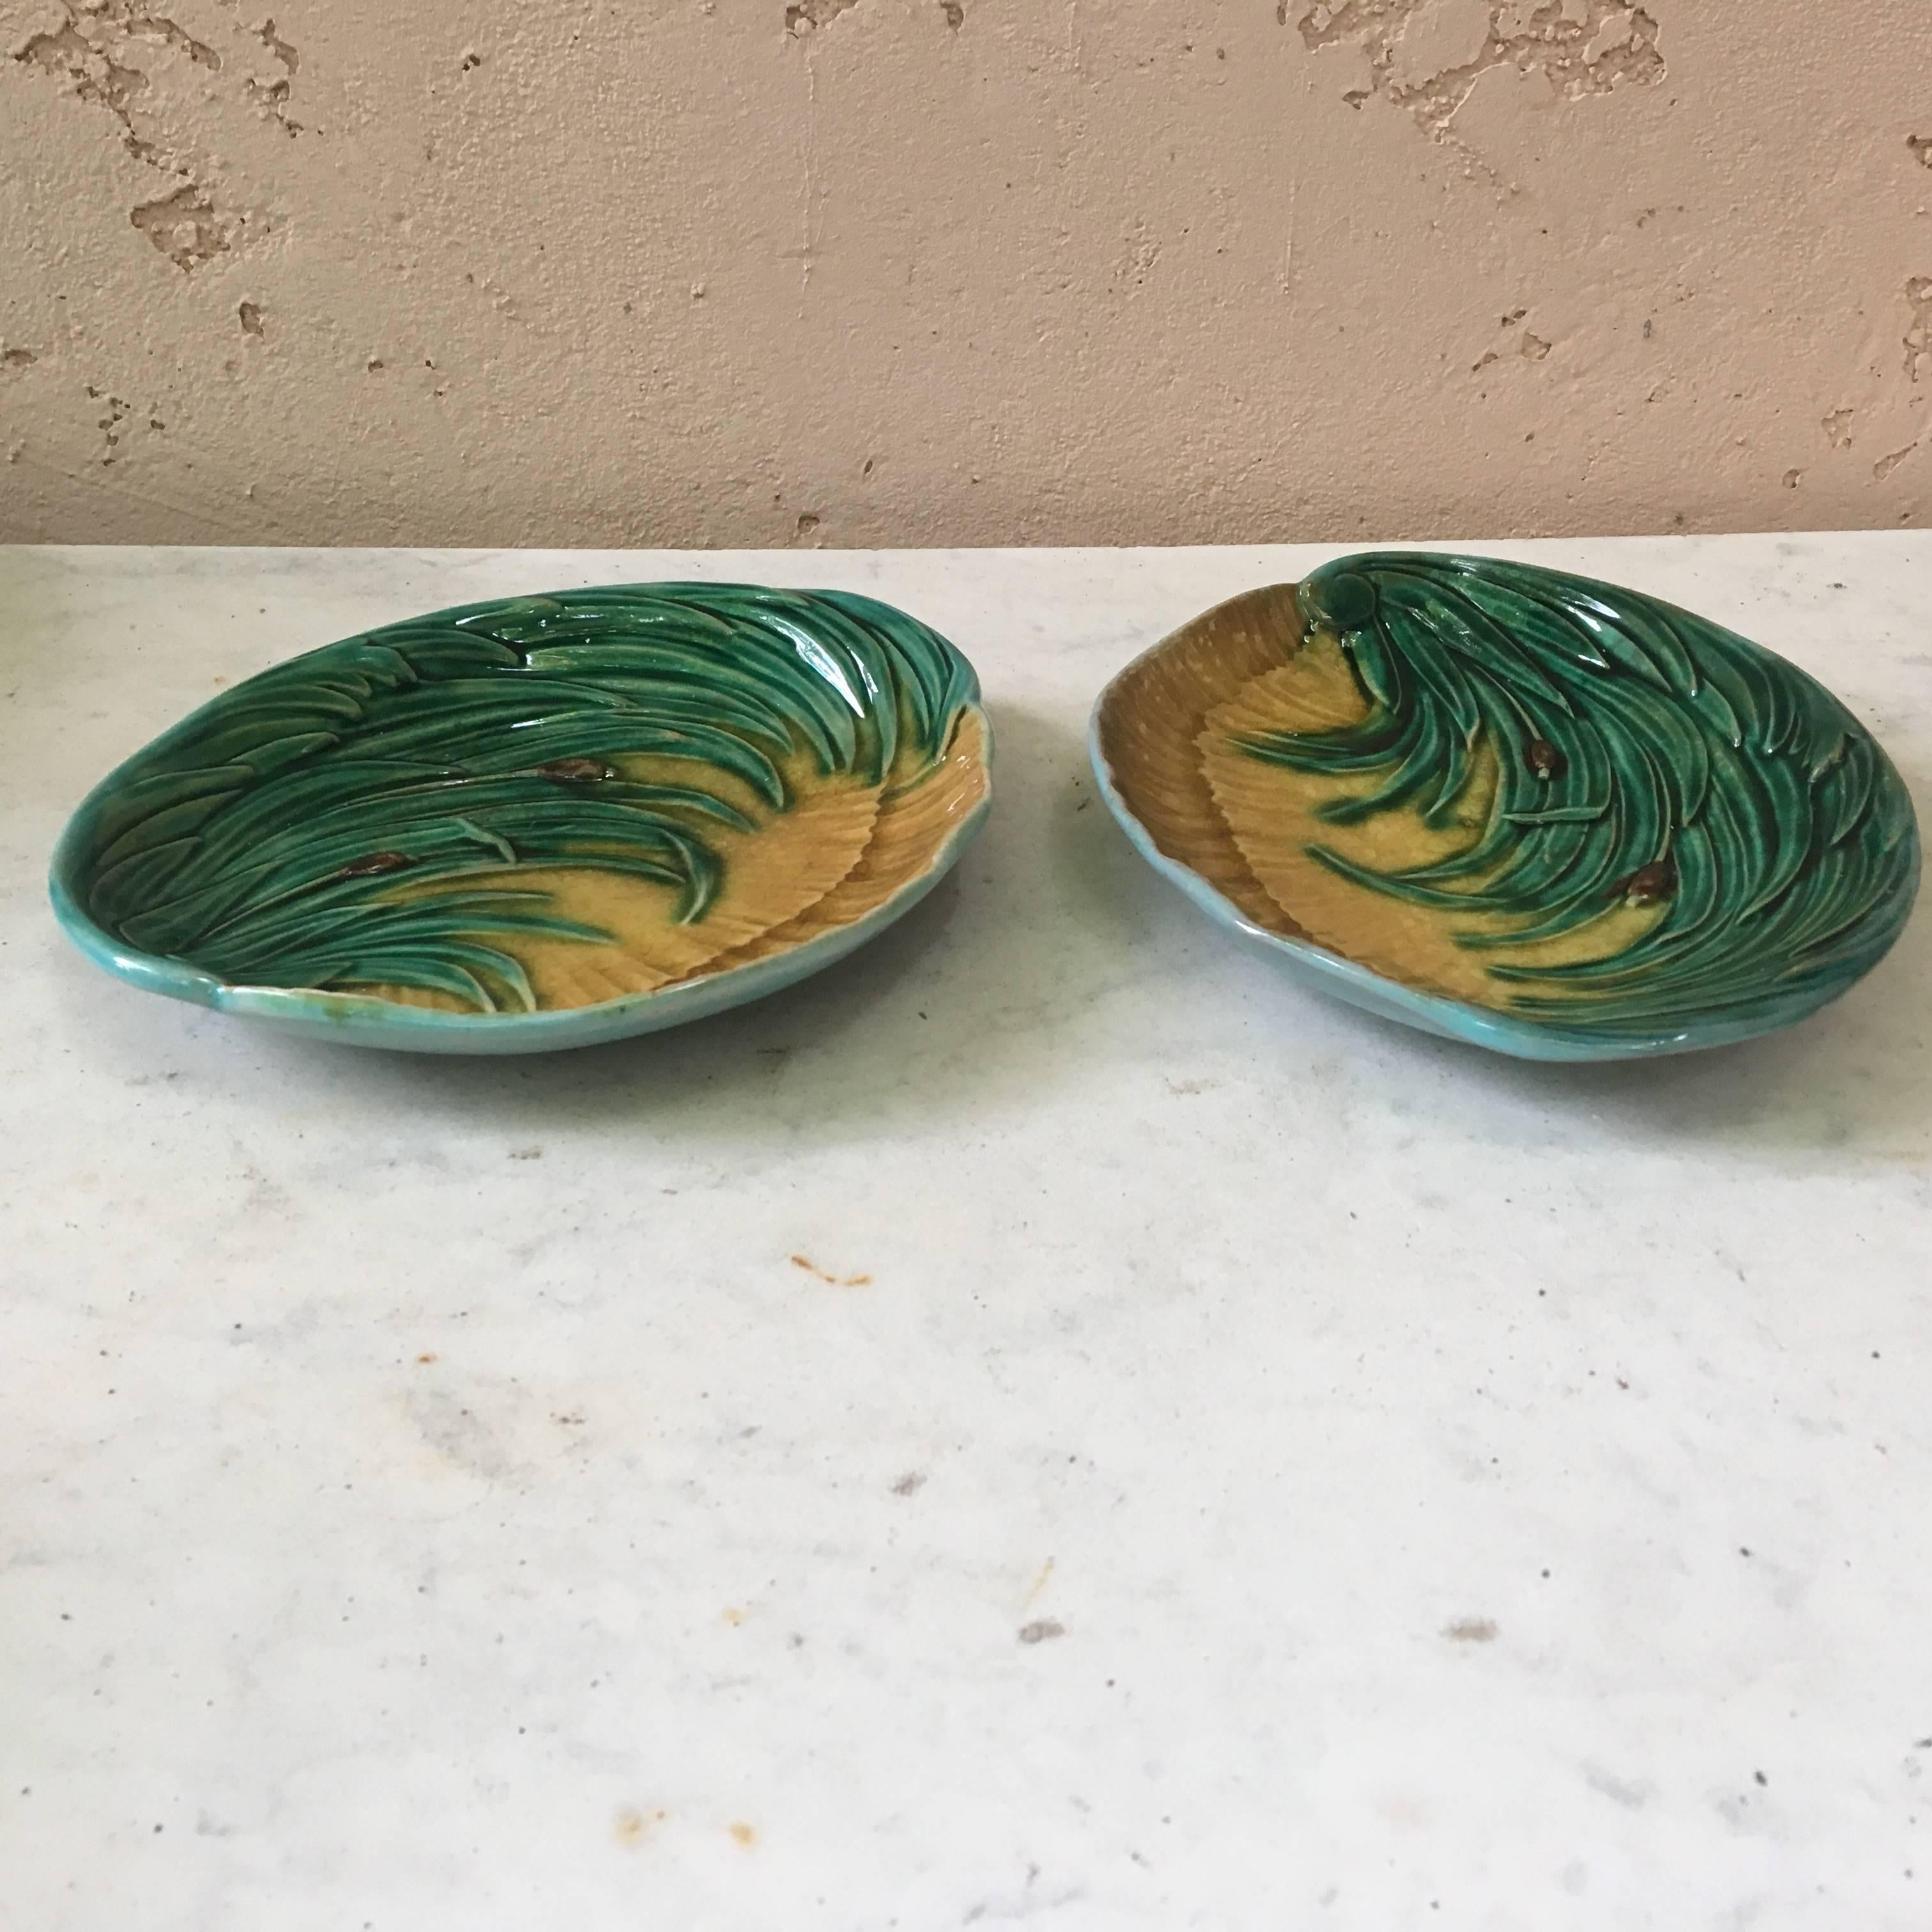 Unusual pair of small Majolica platters in a shell shape decorated with reeds, circa 1880.